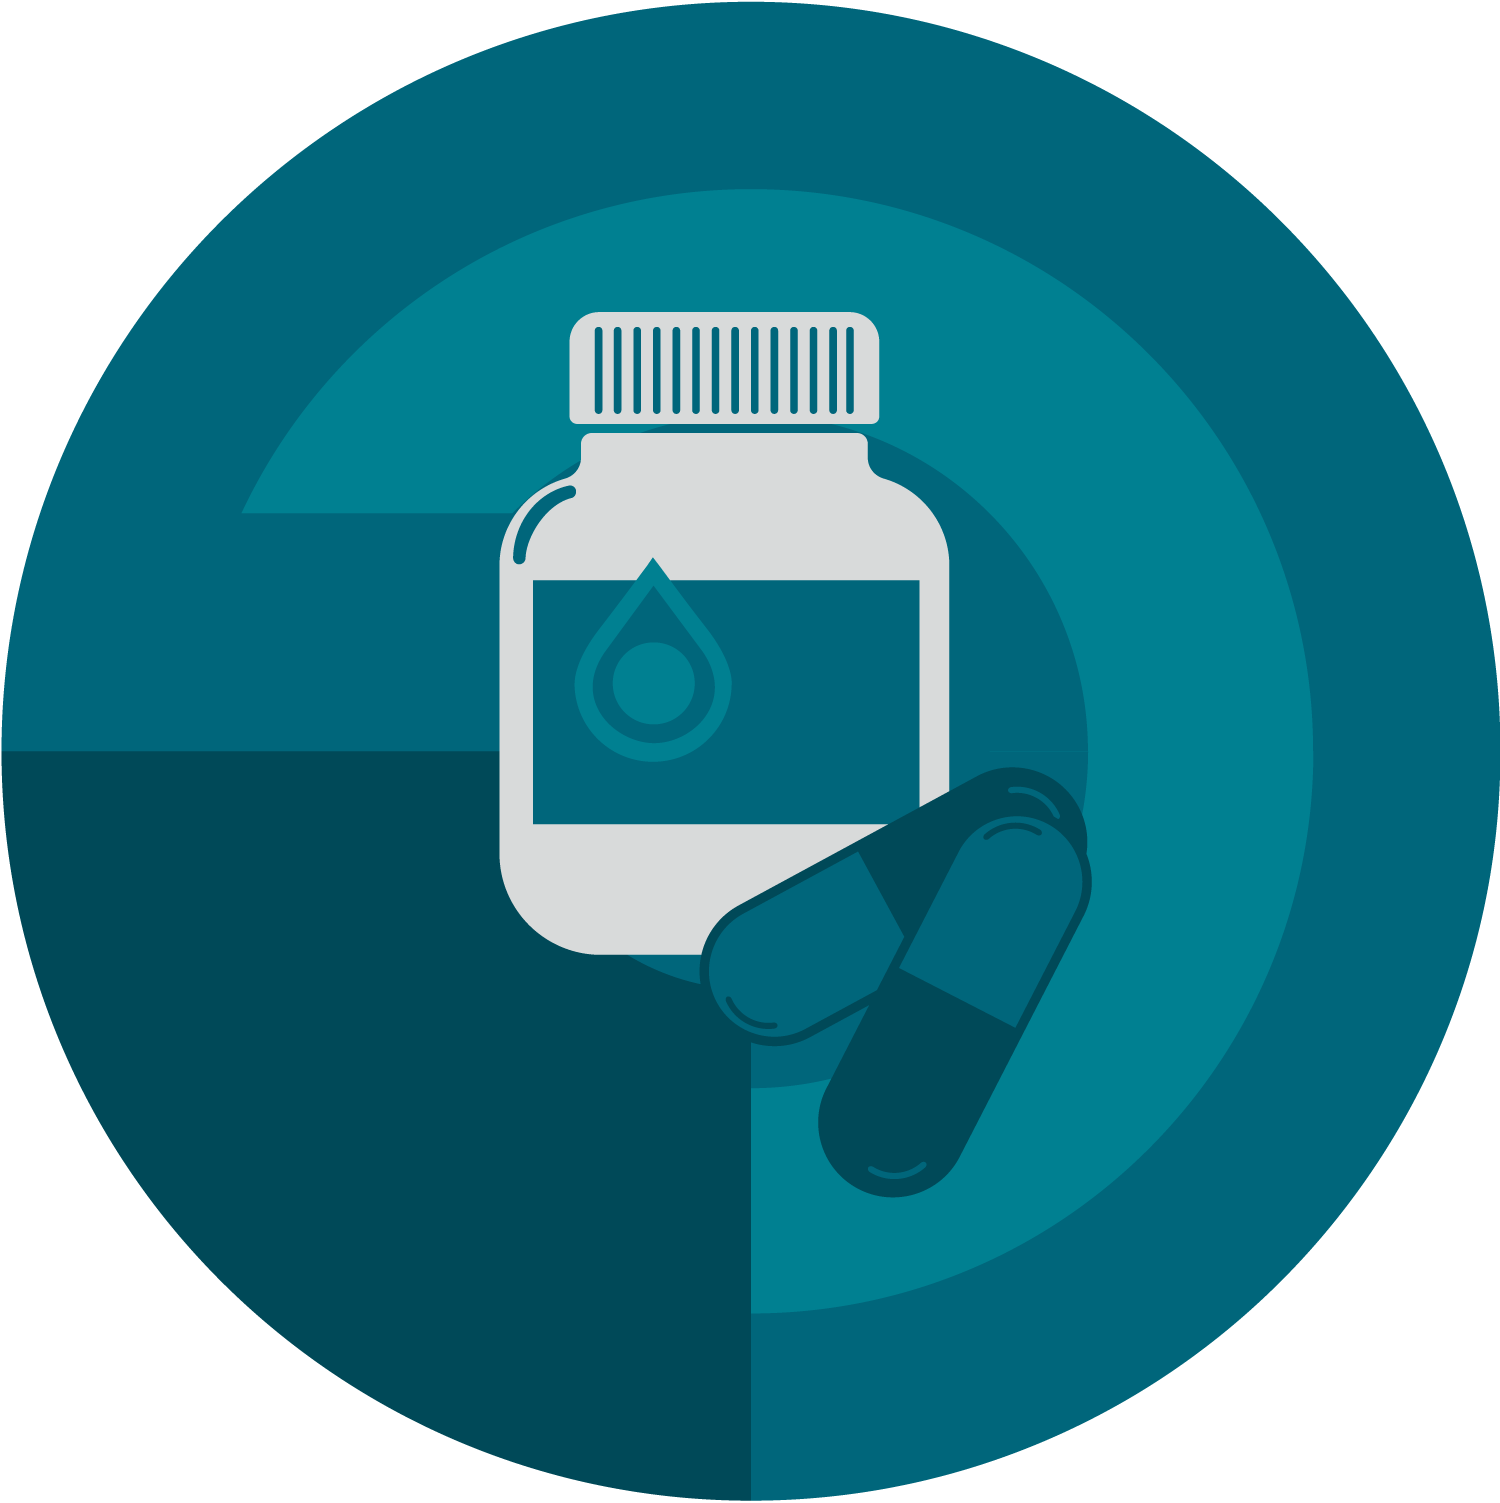  Unimedic Pharma supply the market with a wide range of licenced specialist pharmaceuticals within several therapeutic areas such as emergency care, pain management, infectious diseases, gastroenterology, urology and substance abuse.